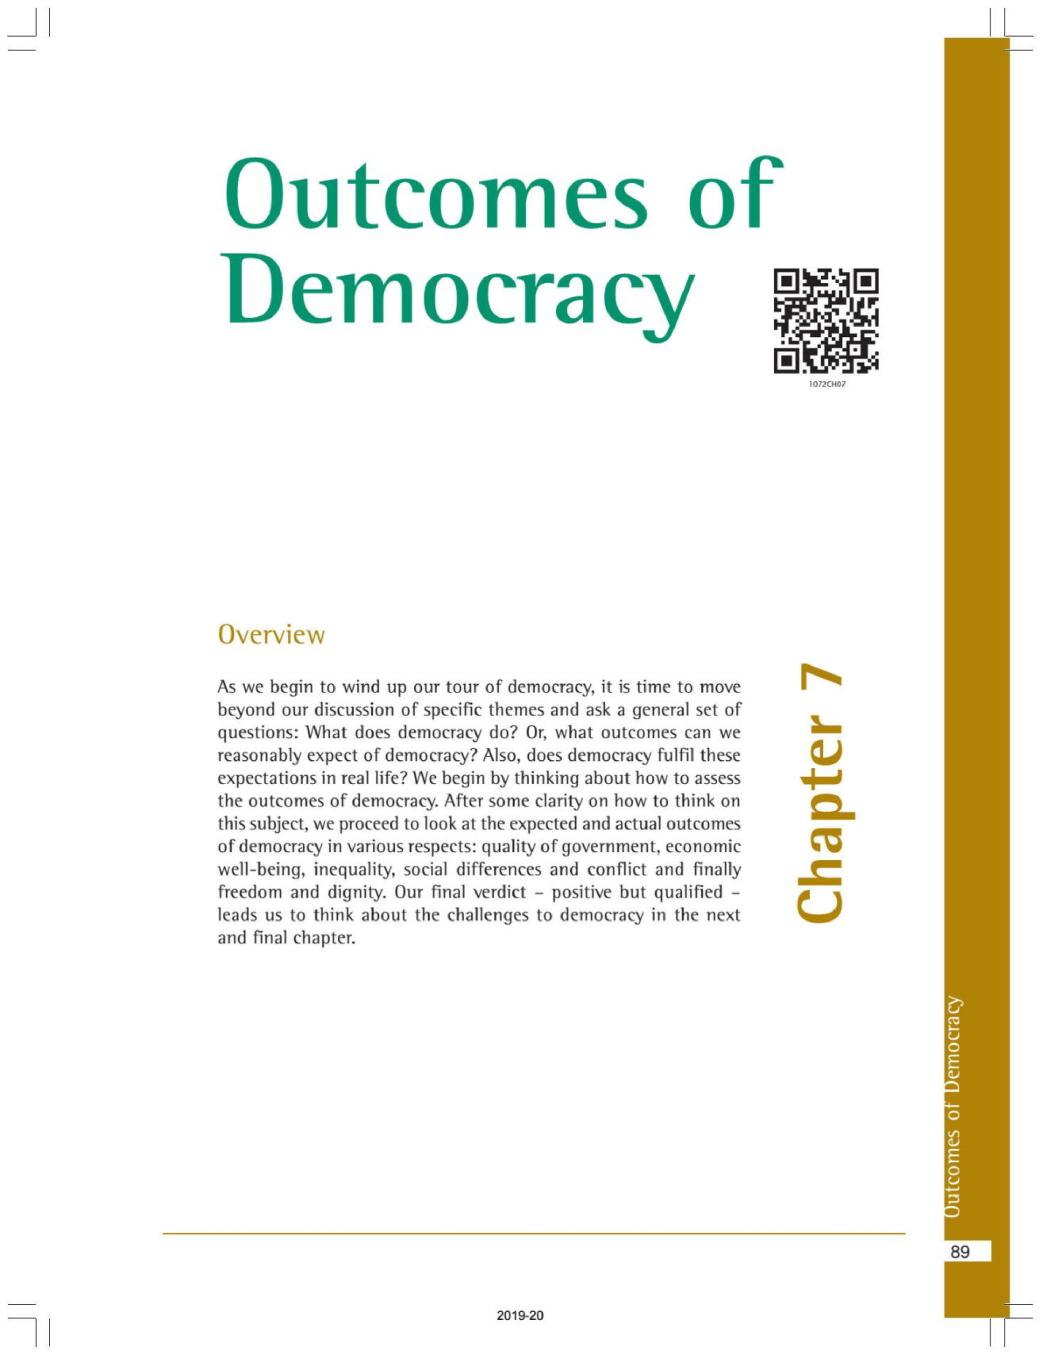 NCERT Book Class 10 Social Science (Civics) Chapter 7 Outcomes of Democracy - Page 1